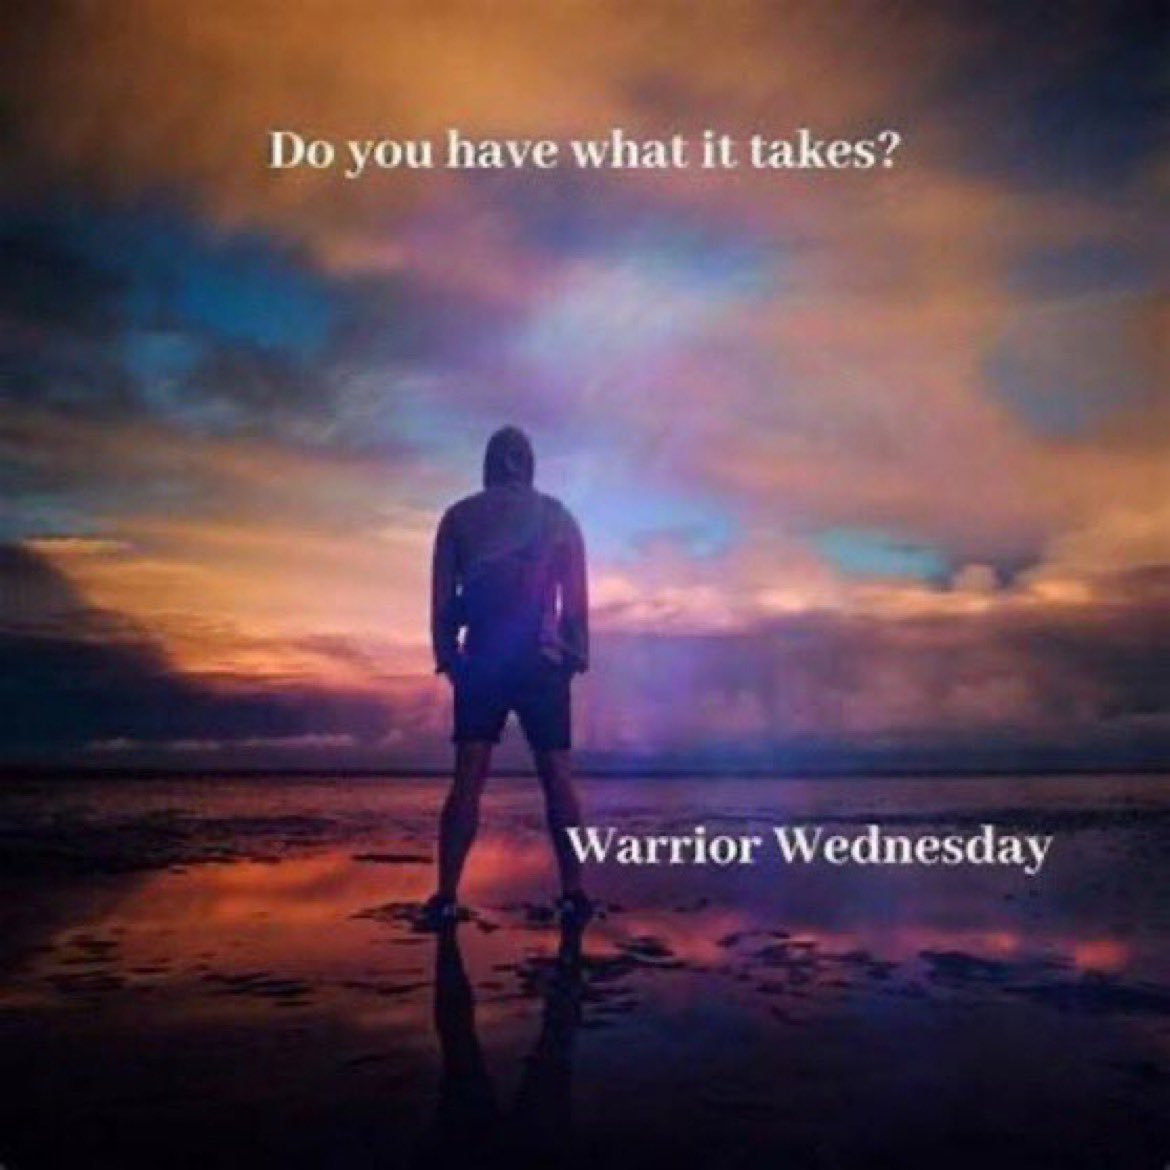 Warriors Wednesday♥️🙏🇺🇸♥️🤍💙 Thank you♥️🙏🇺🇸♥️🤍💙